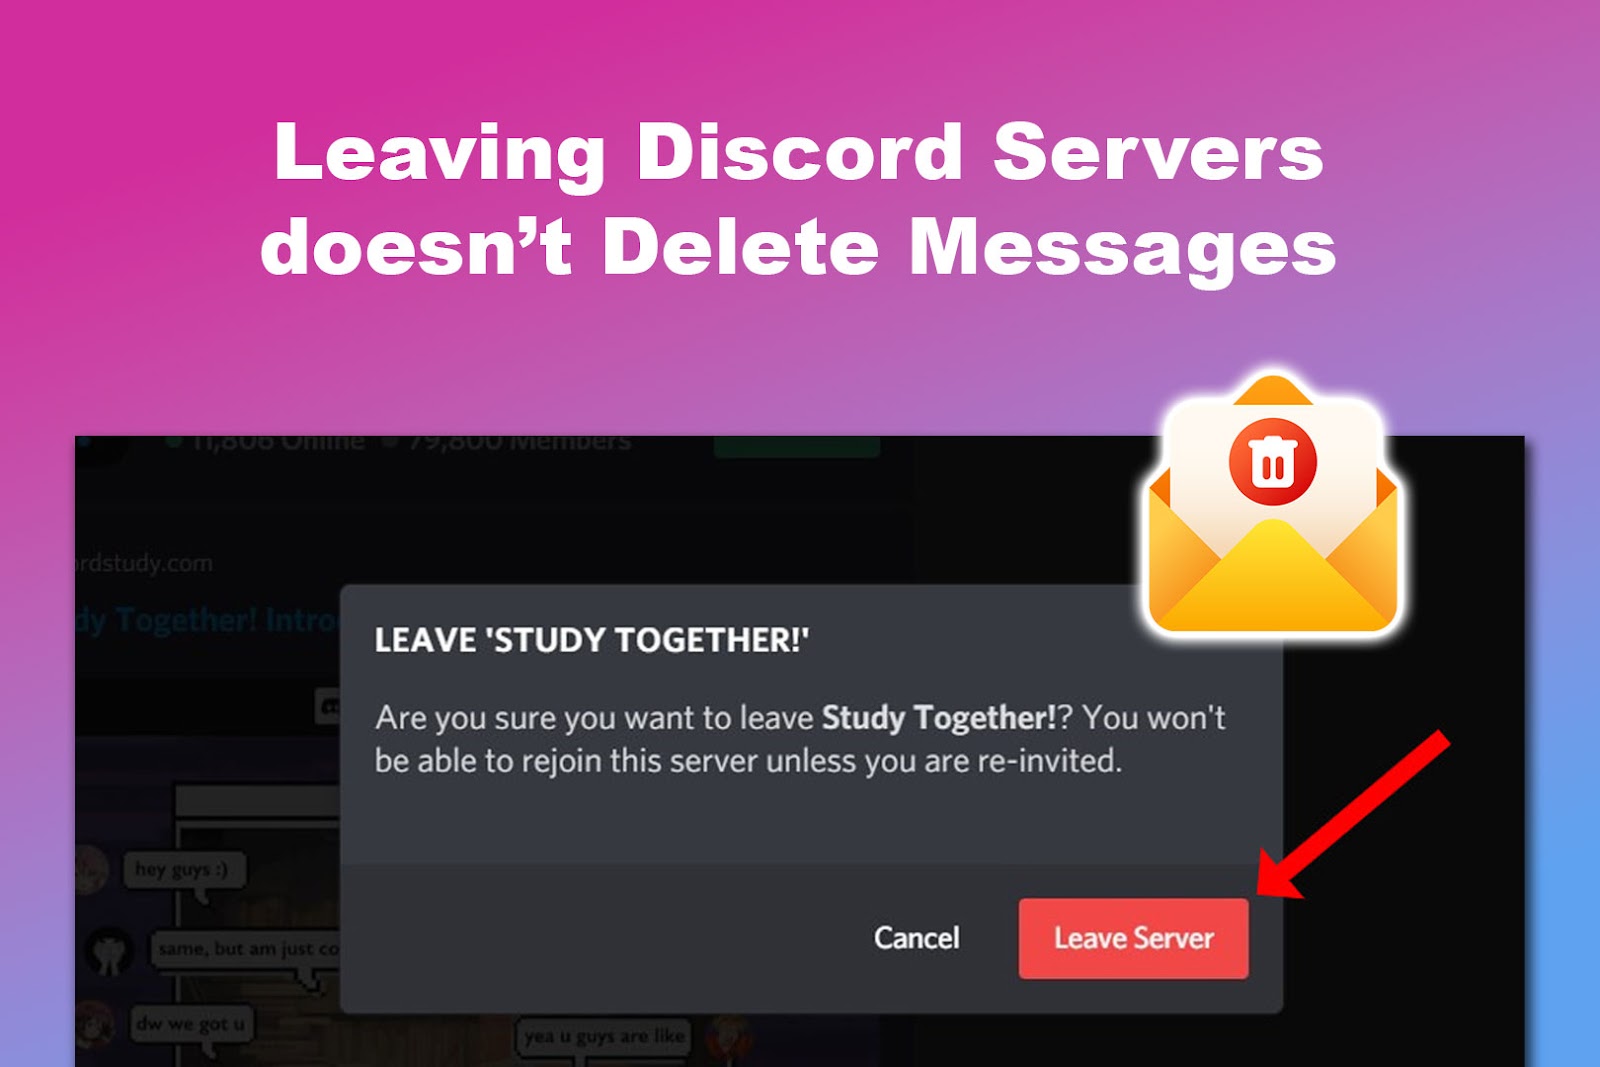 Does Leaving Discord Servers Delete Messages